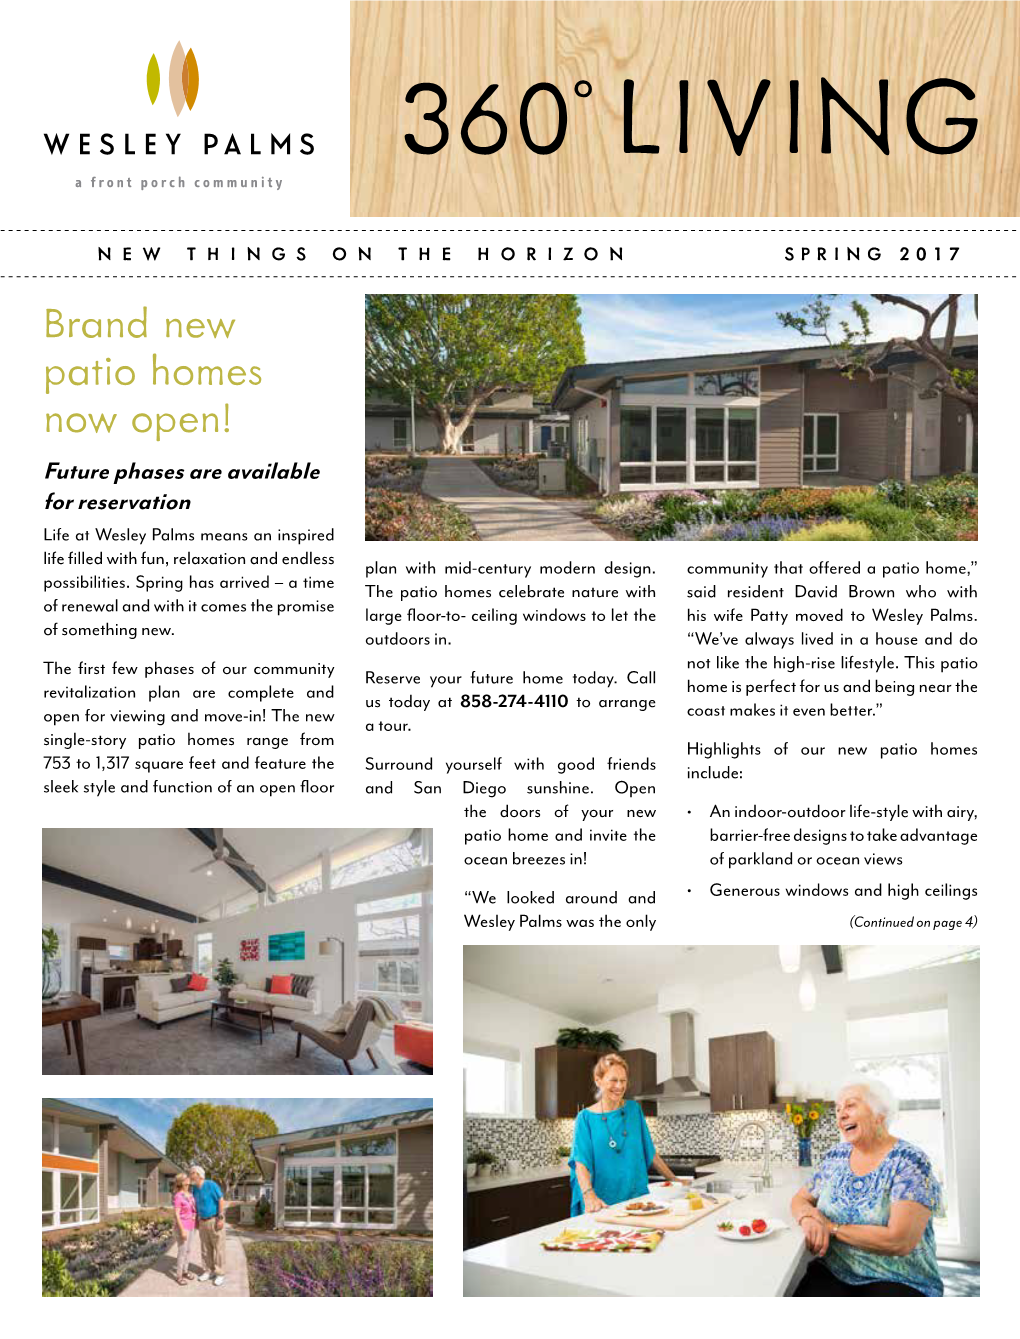 Brand New Patio Homes Now Open!